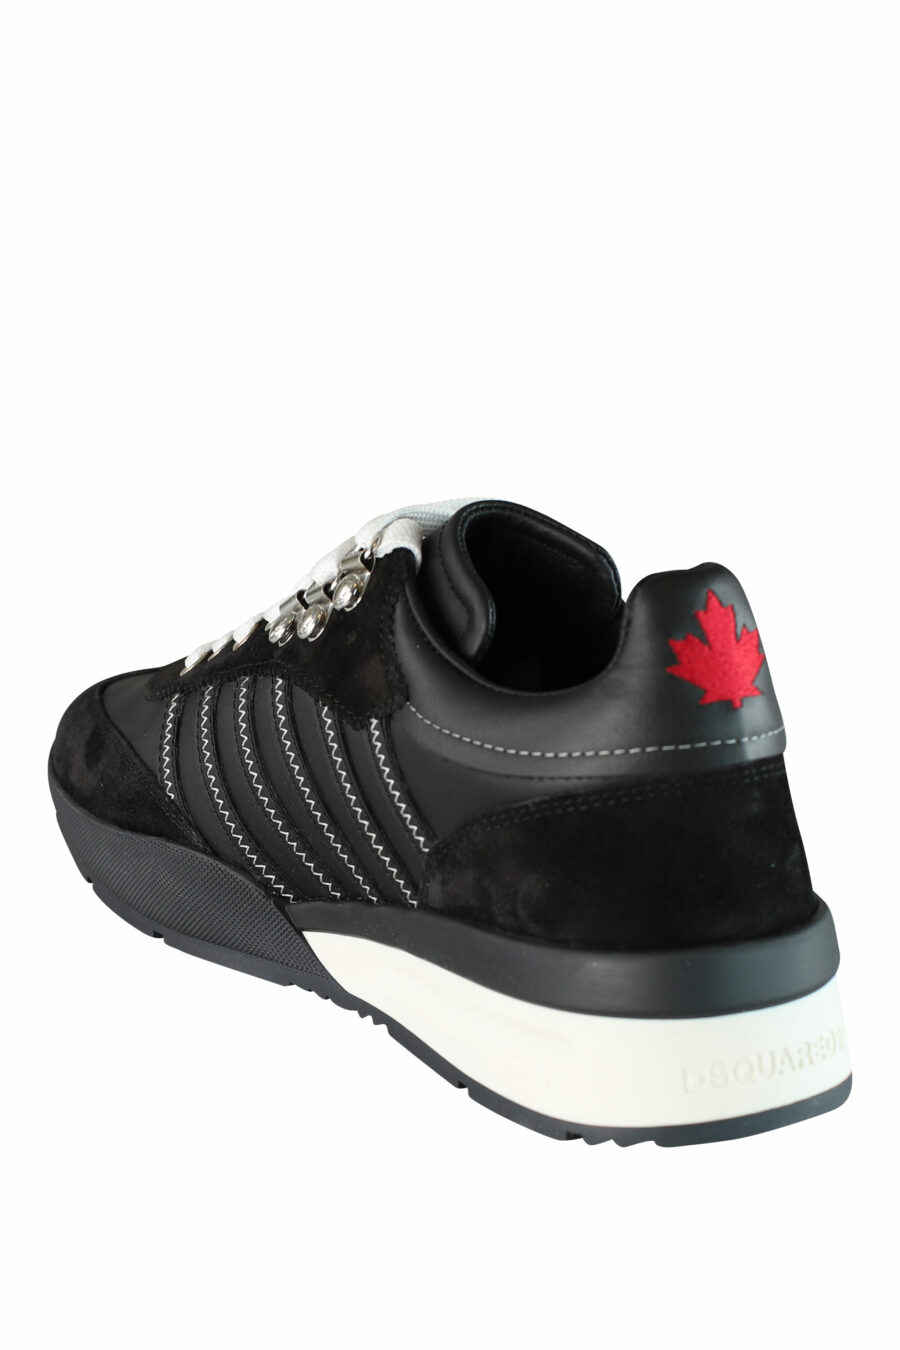 Original legend" black mix trainers with two-tone sole and diagonal lines - IMG 1485